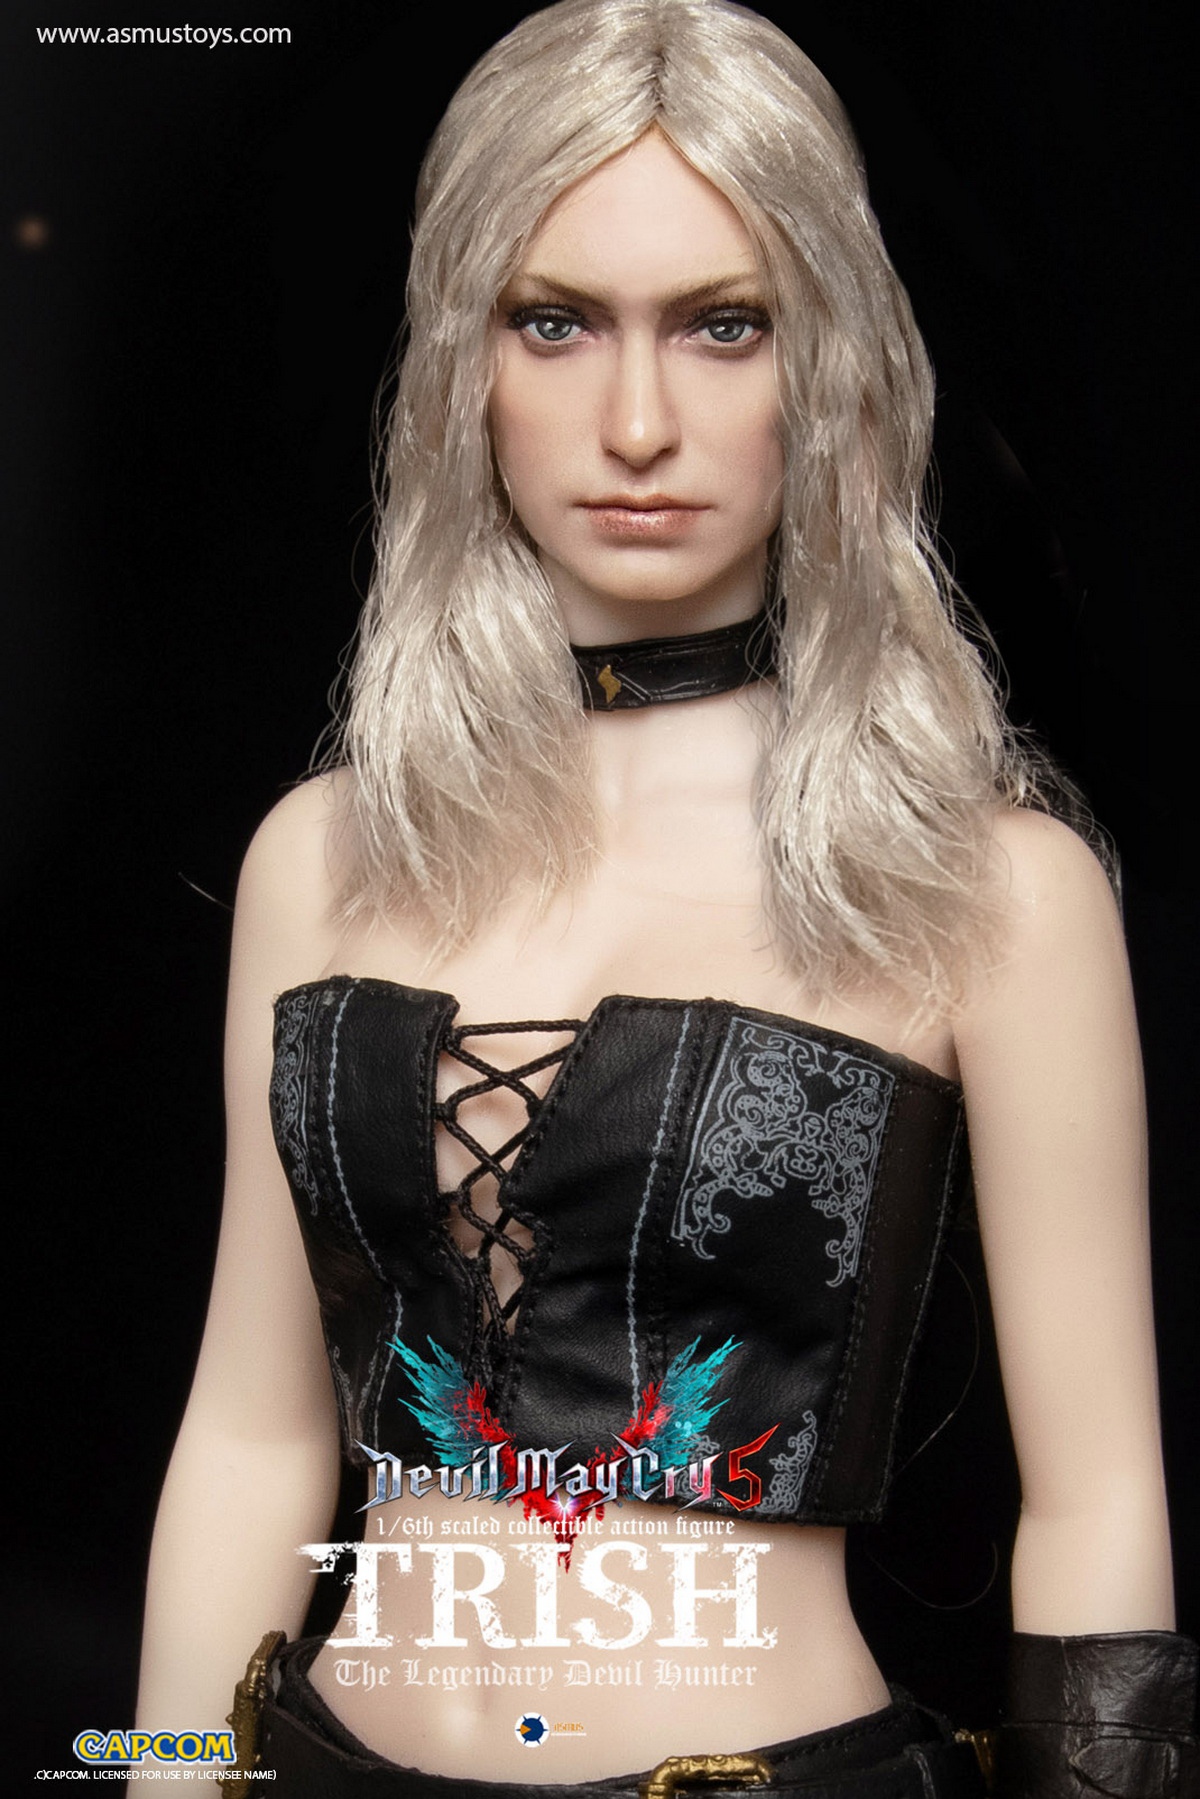 devilmaycry - NEW PRODUCT: Asmus New Toys: "Devil May Cry 5" - Trish (DMC504) 0523